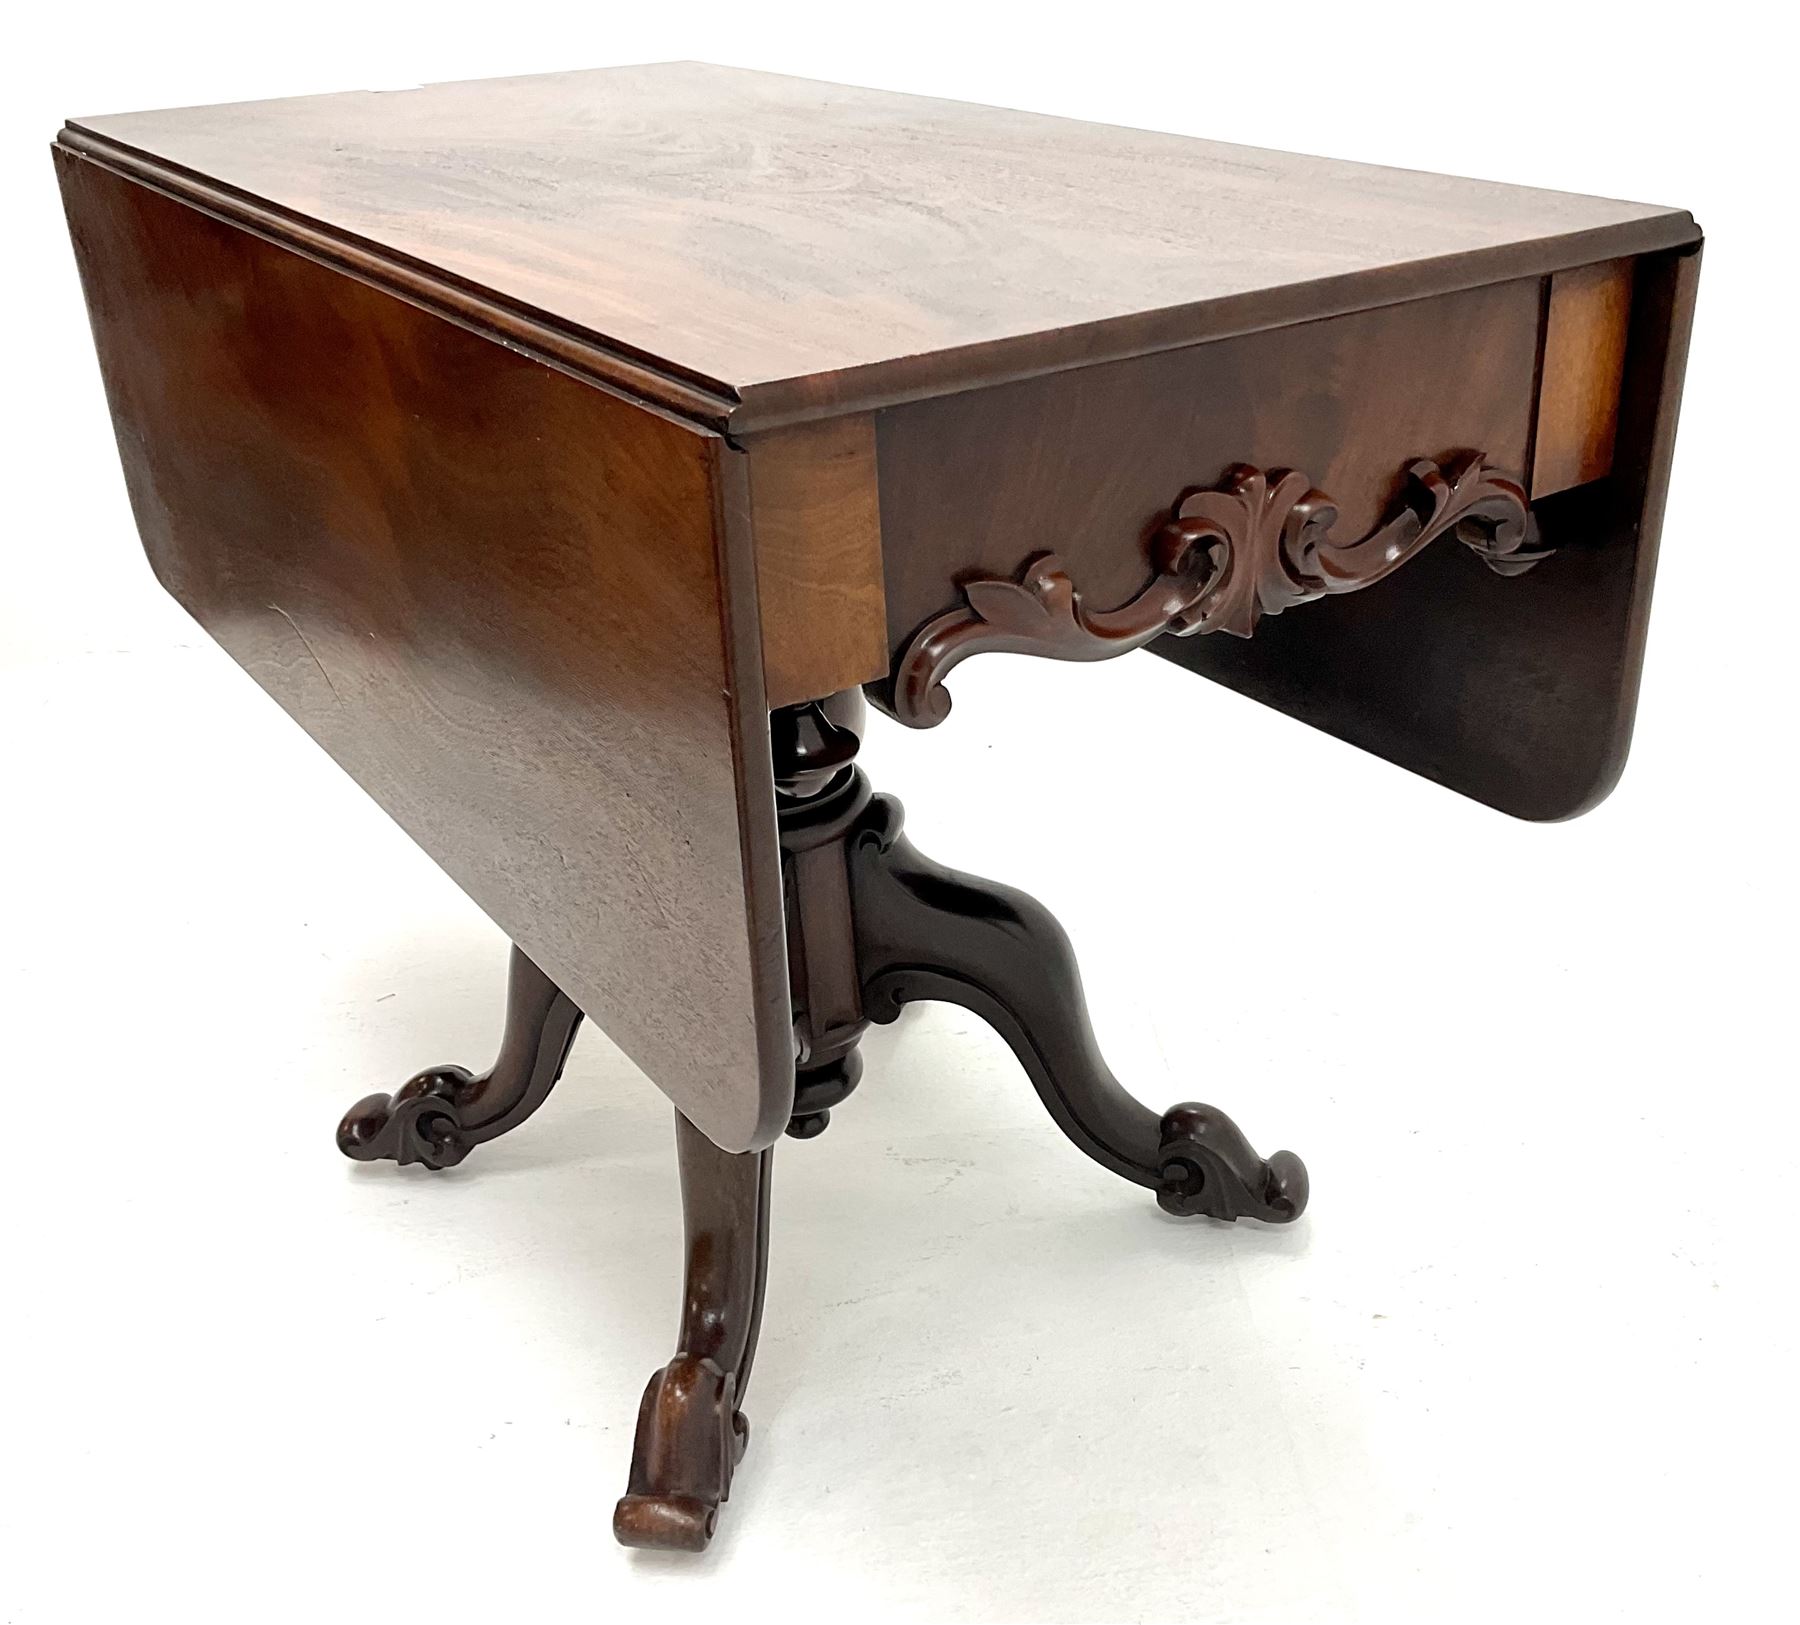 Early Victorian figured mahogany drop leaf support table - Image 2 of 4